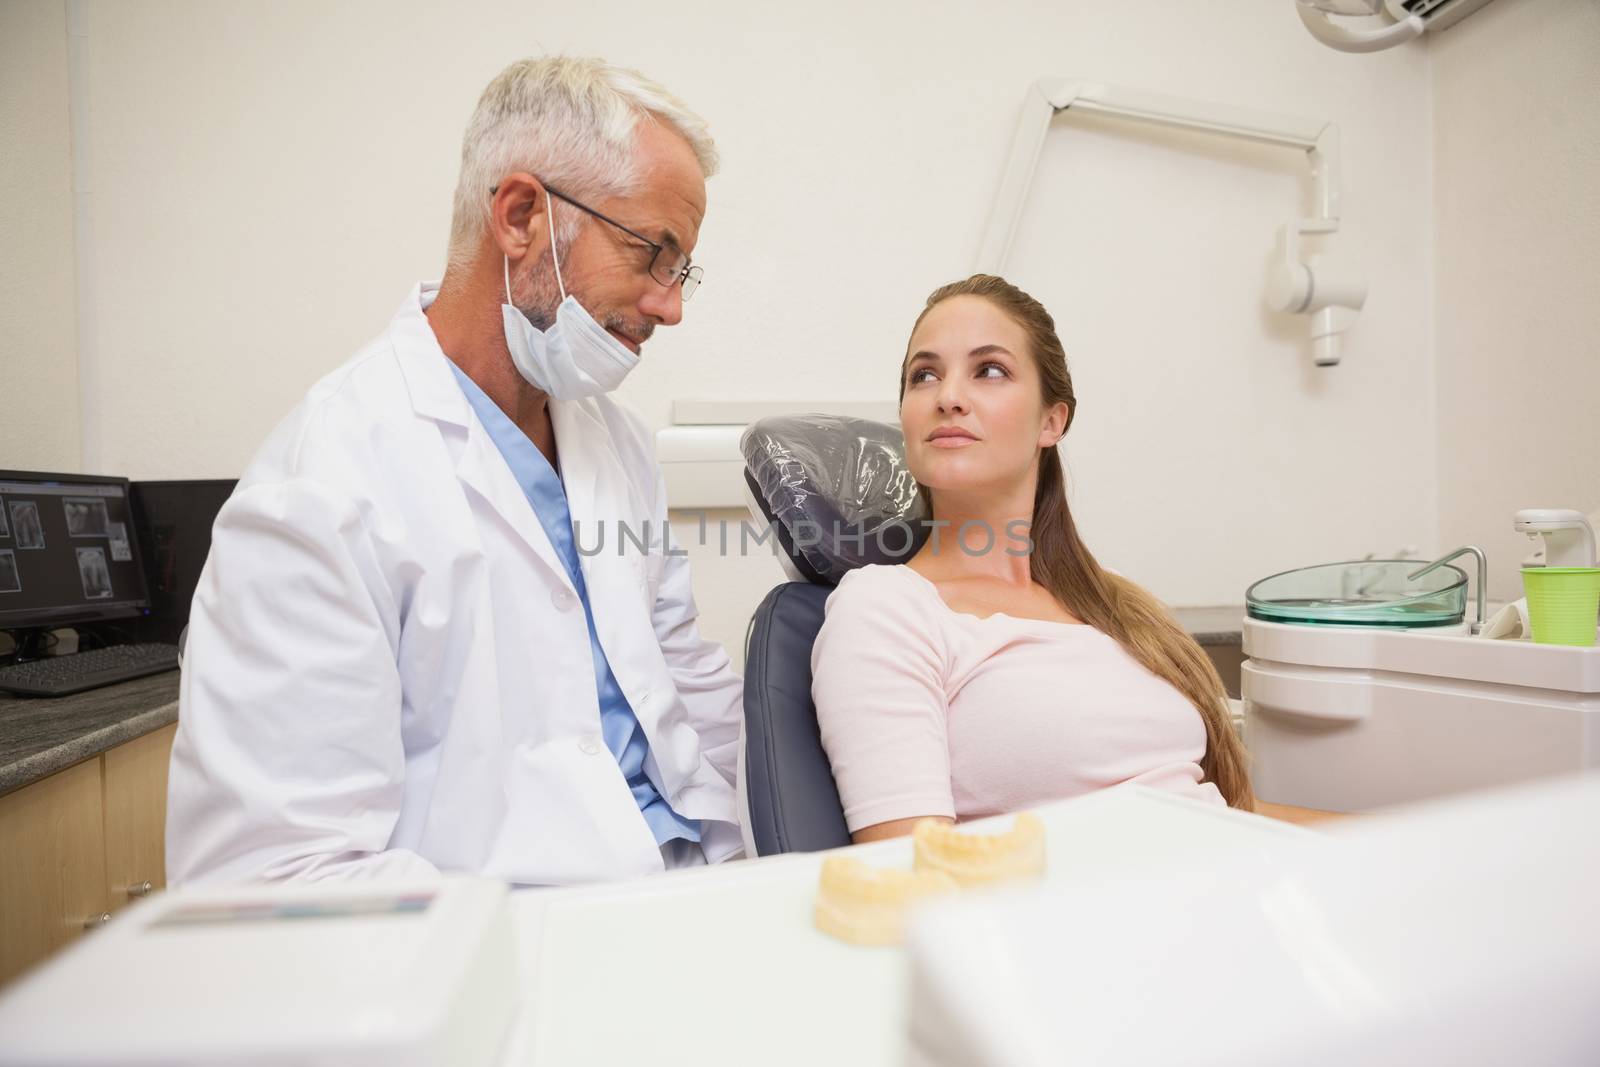 Dentist and patient looking at each other at the dental clinic